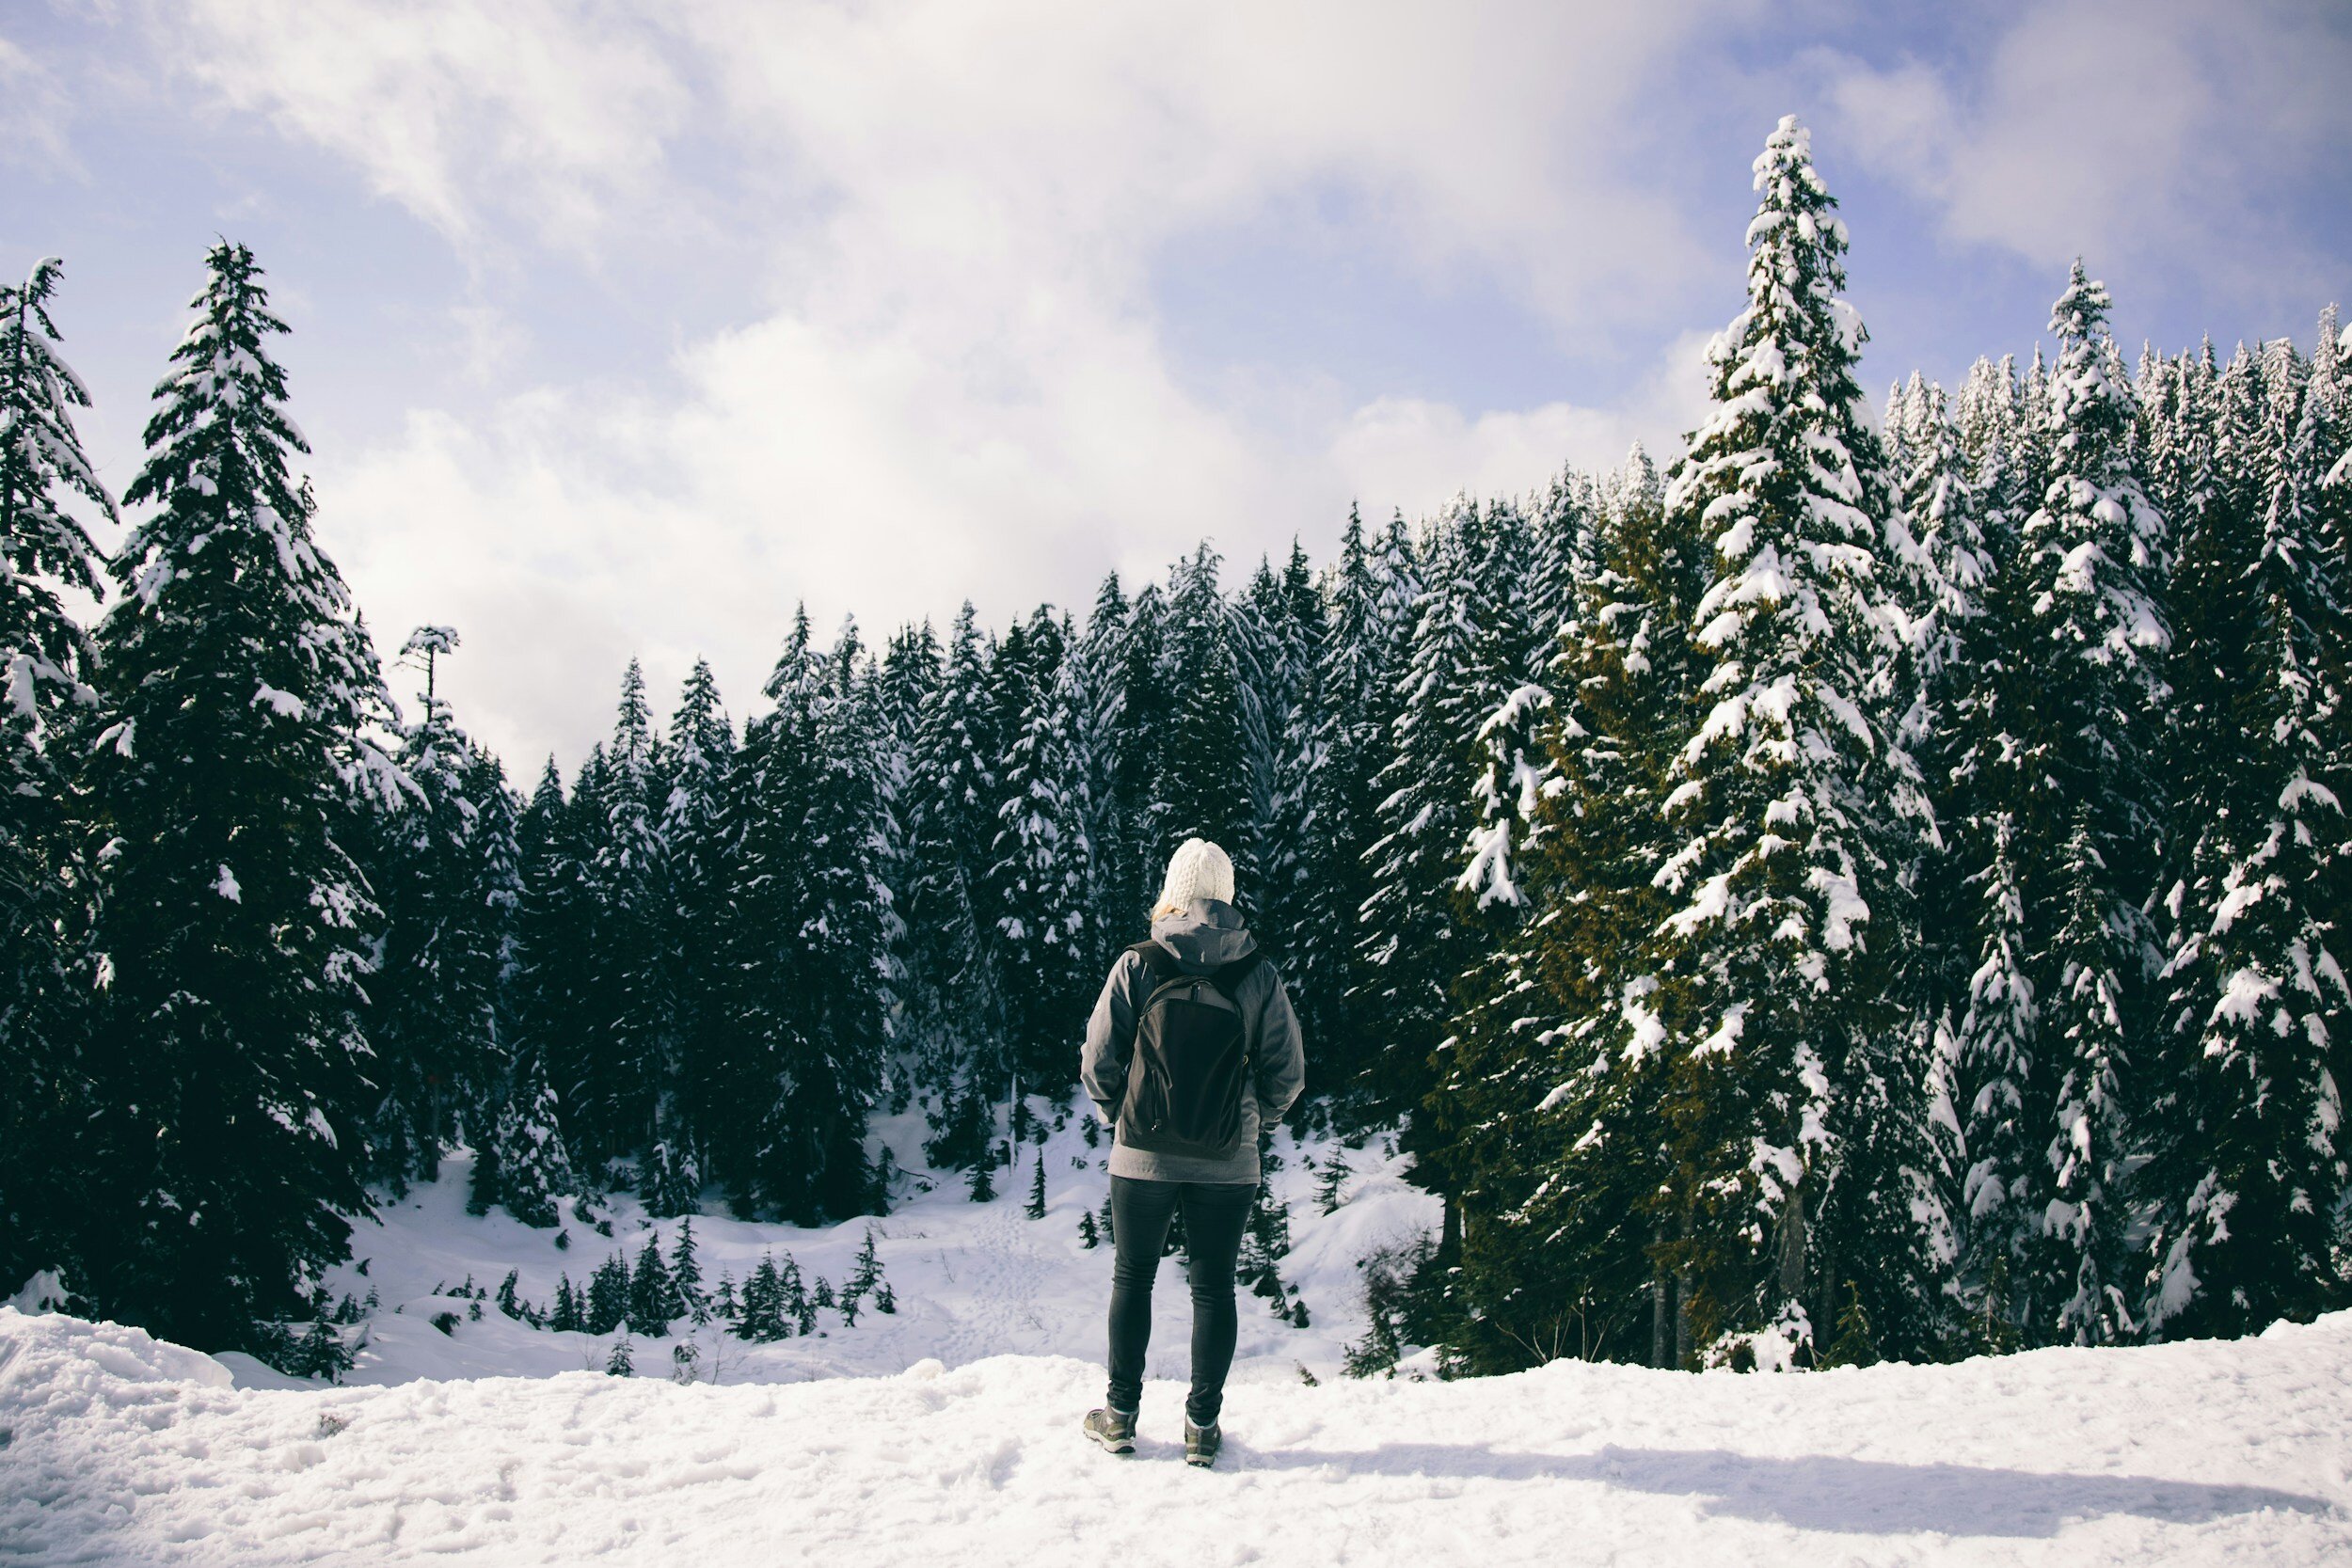 10 Simple Tips for Winter Hiking